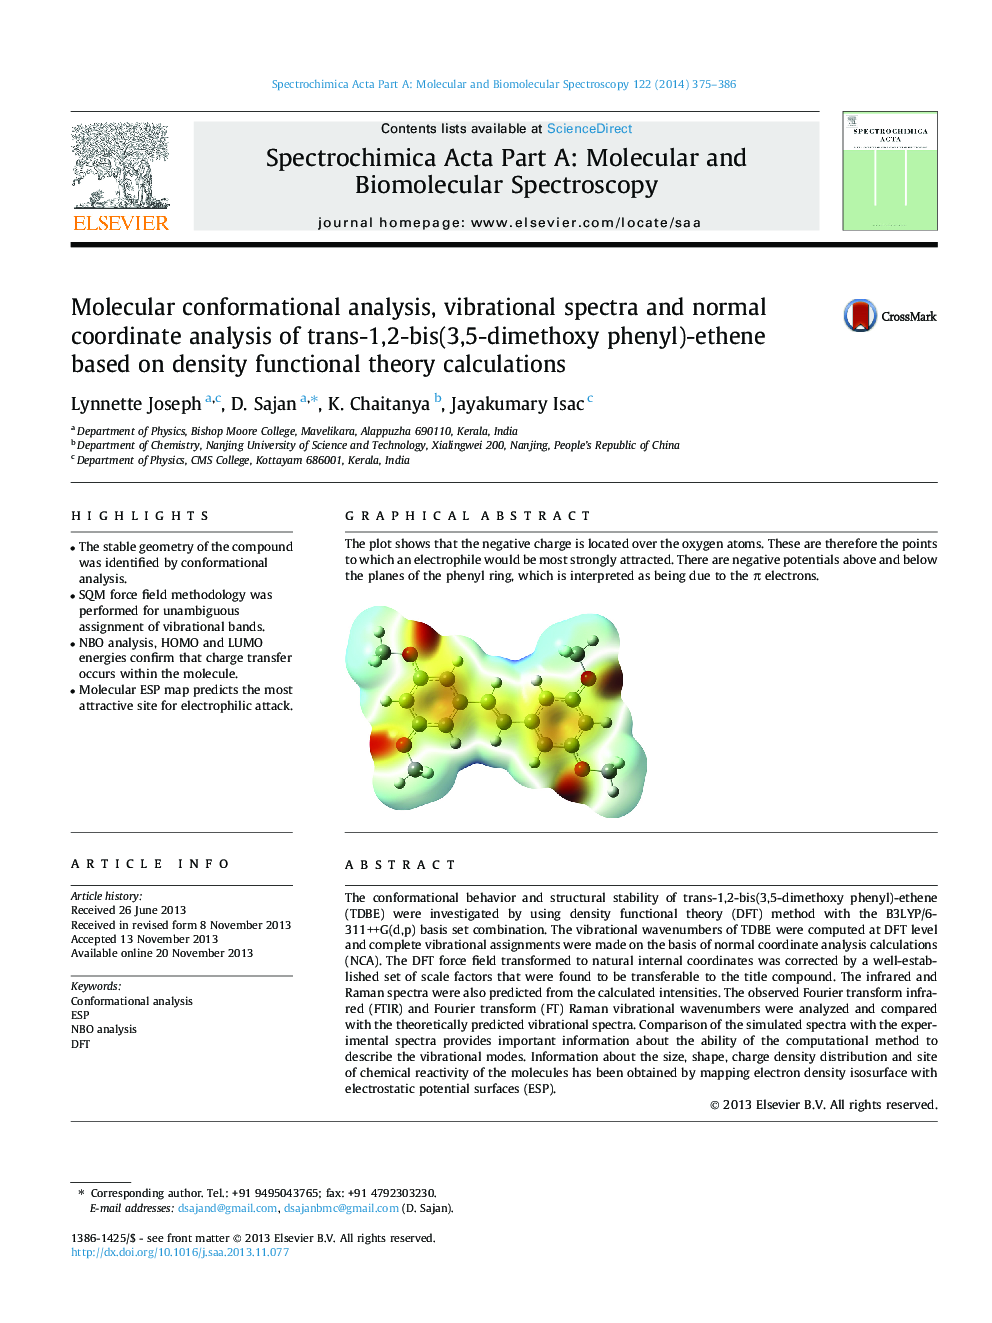 Molecular conformational analysis, vibrational spectra and normal coordinate analysis of trans-1,2-bis(3,5-dimethoxy phenyl)-ethene based on density functional theory calculations